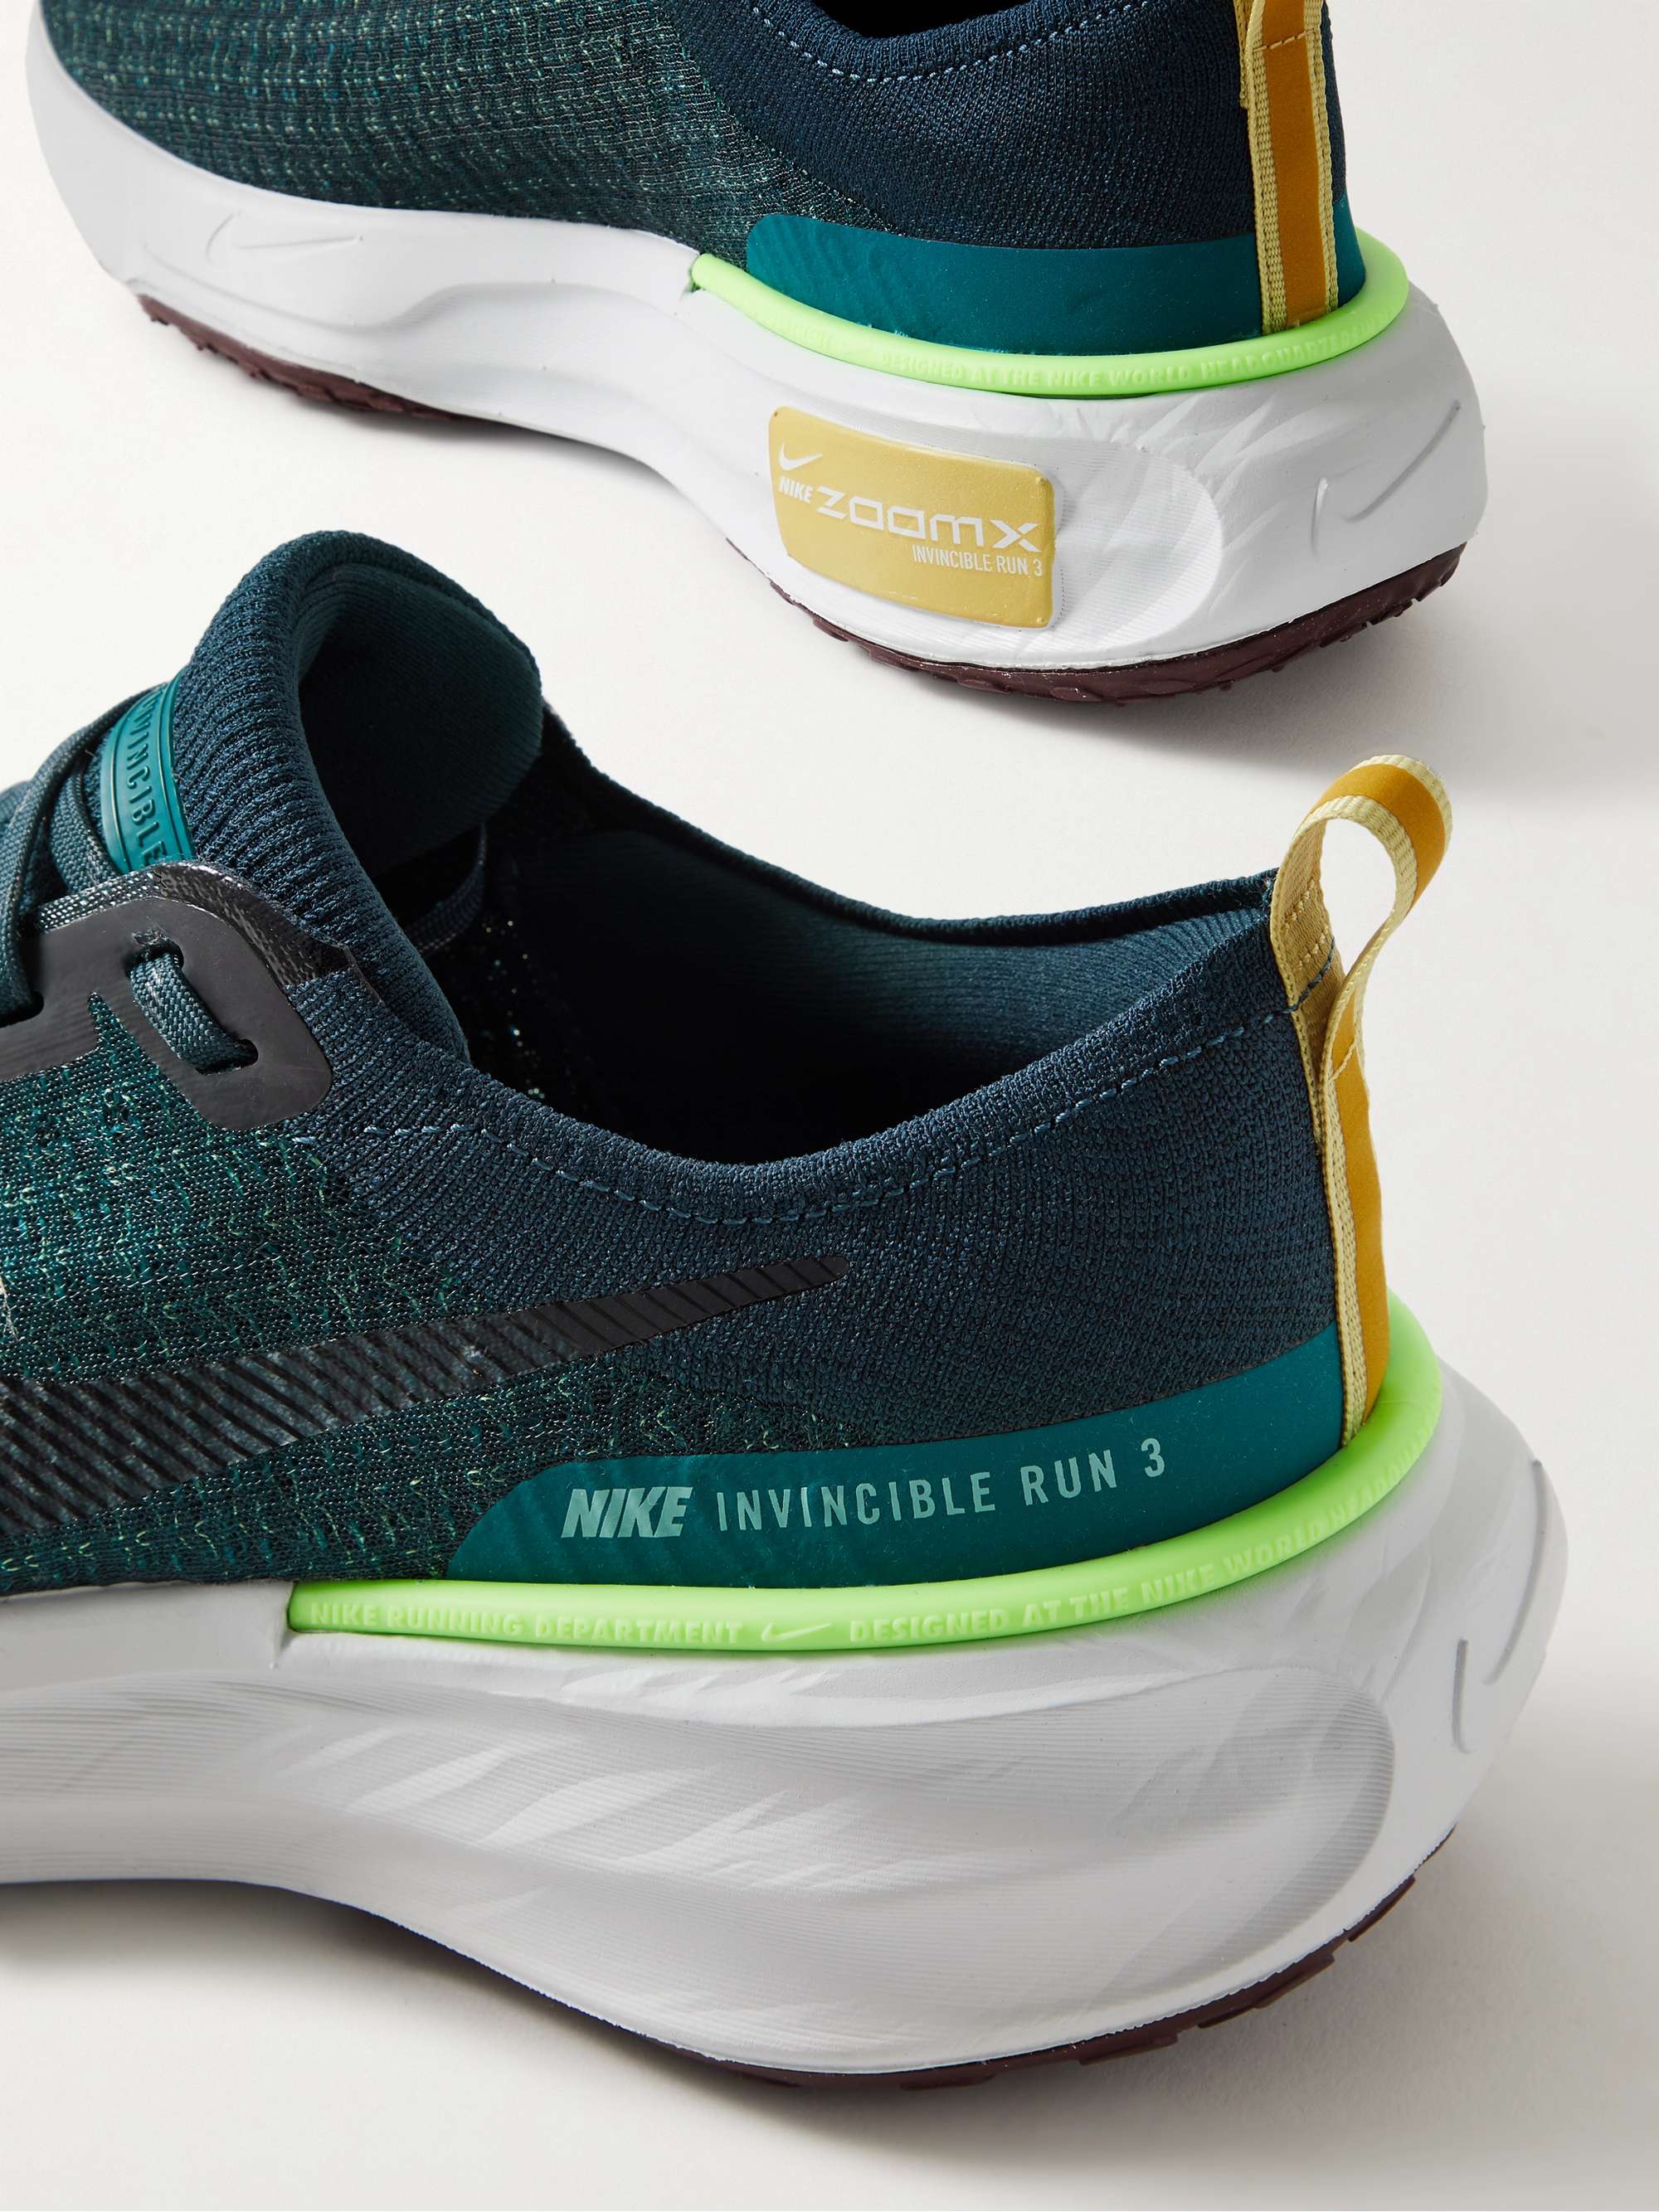 Nike Previews The ZoomX Invincible Run Flyknit 3 At The Armory